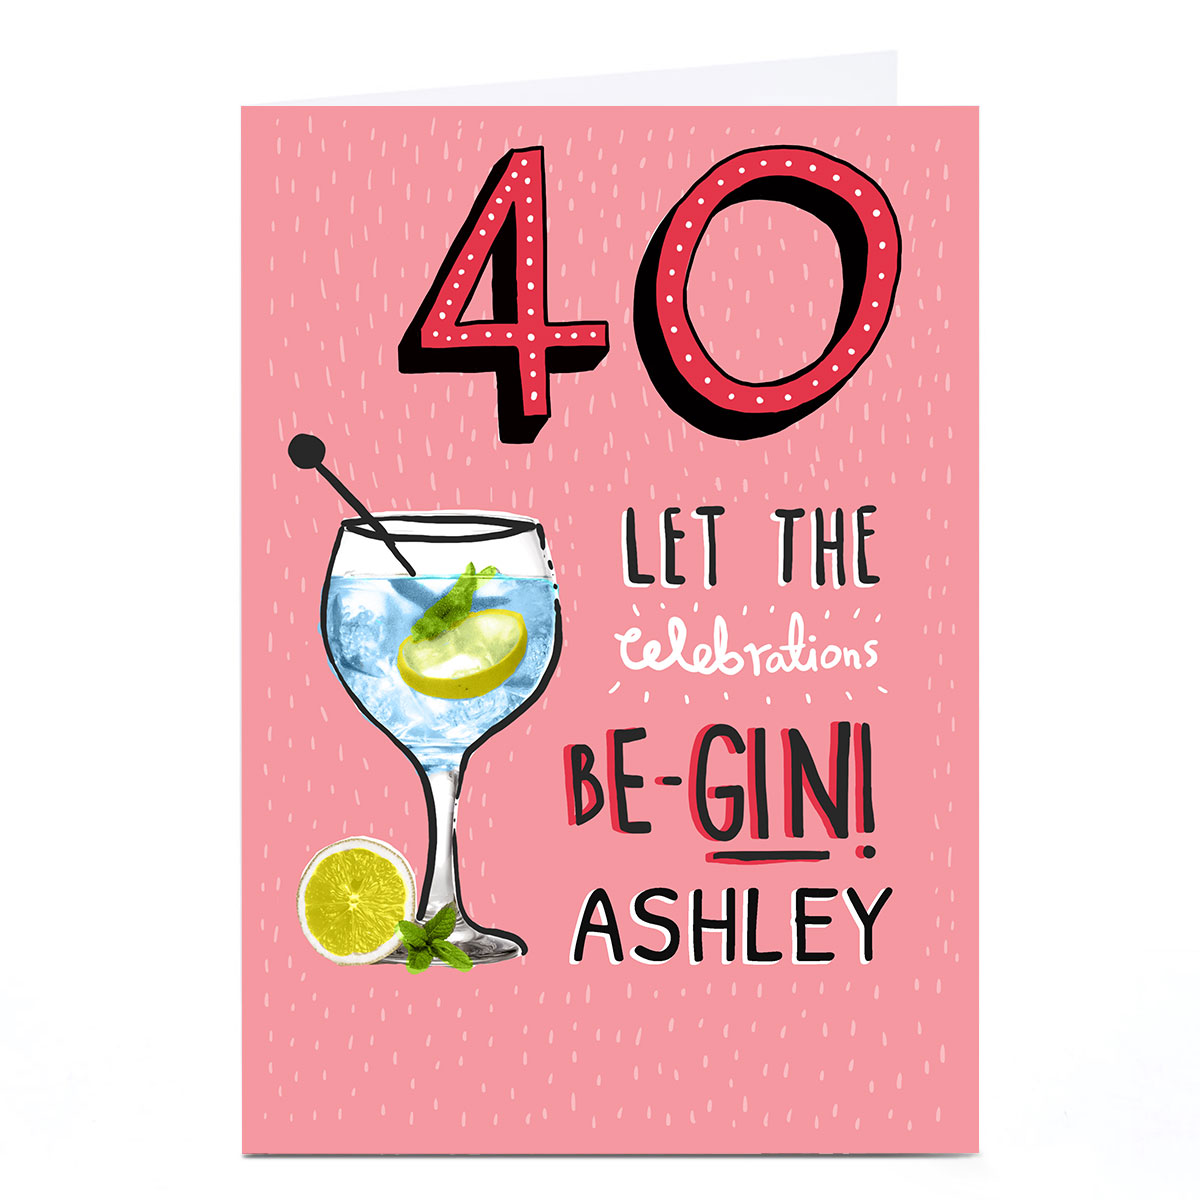 Personalised Birthday Card - Let The Celebrations Be-Gin!